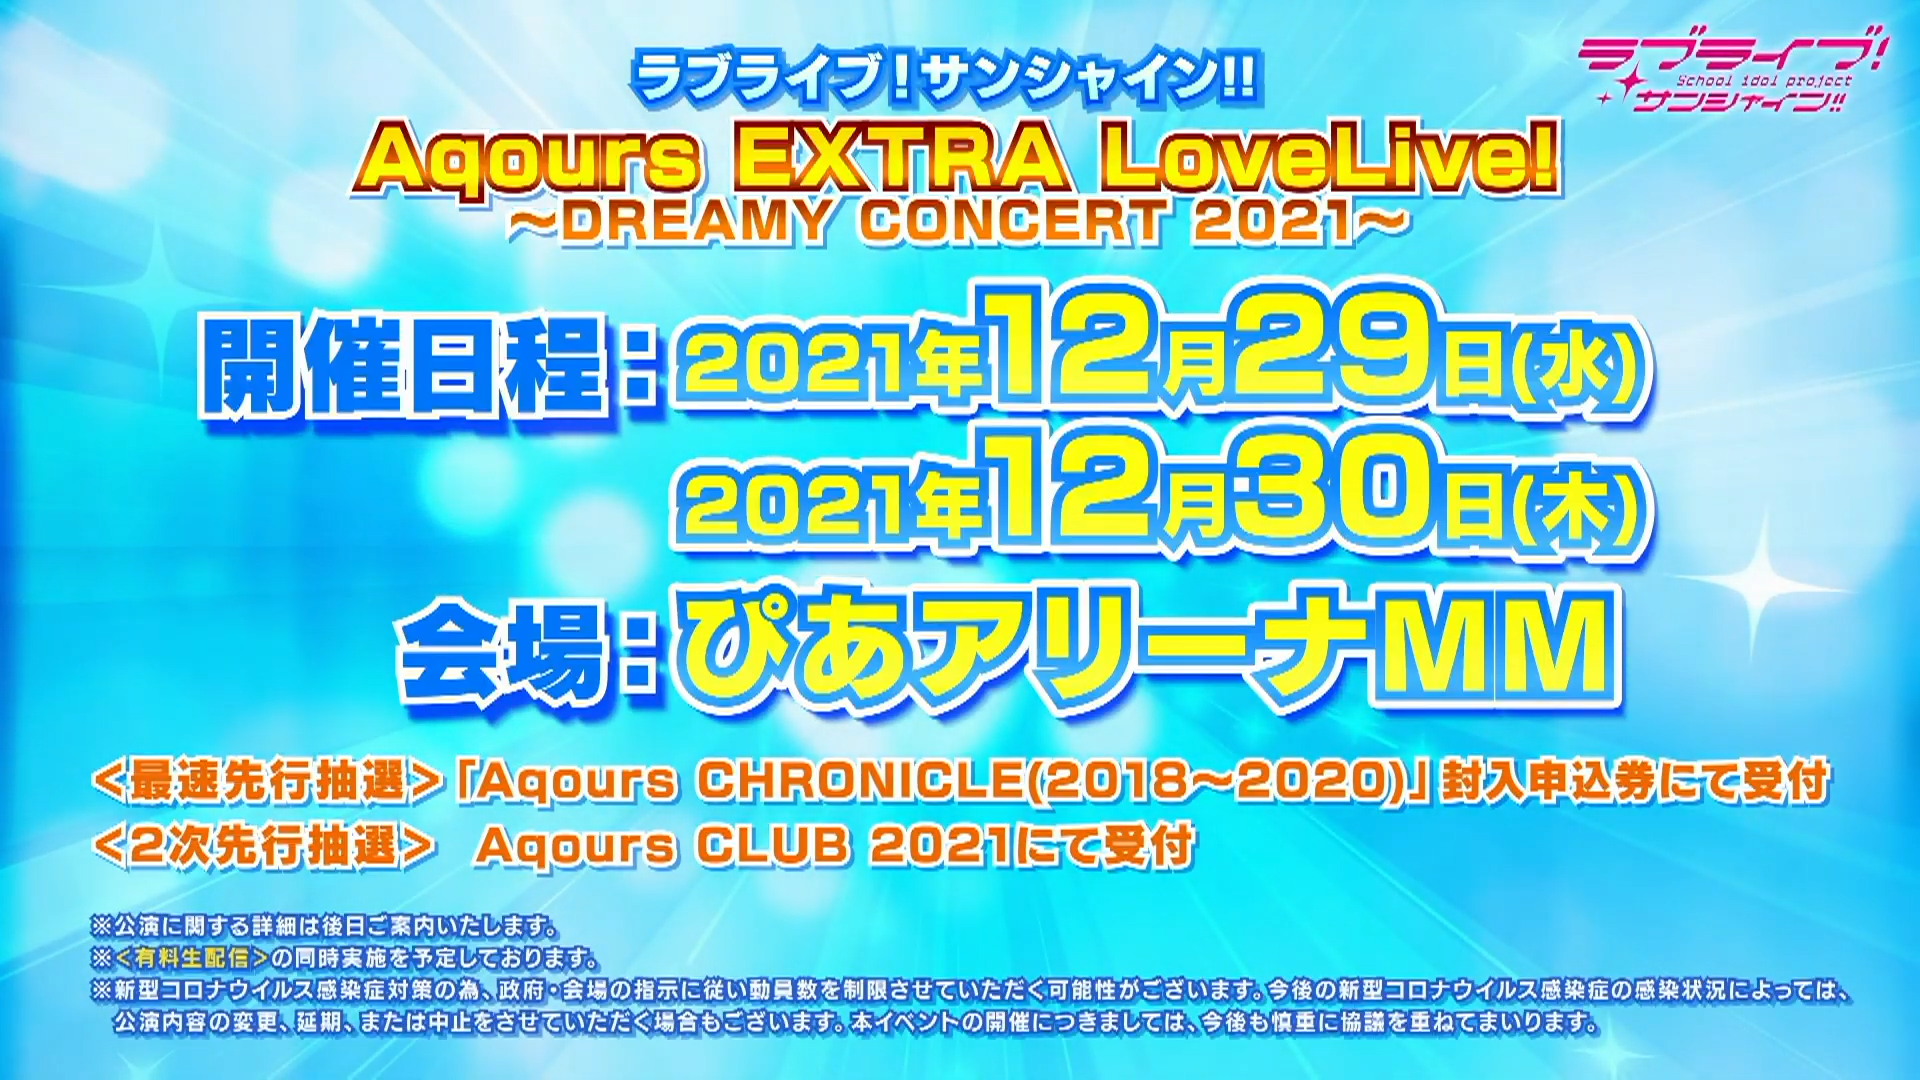 Aqours EXTRA LoveLive! ~DREAMY CONCERT 2021~